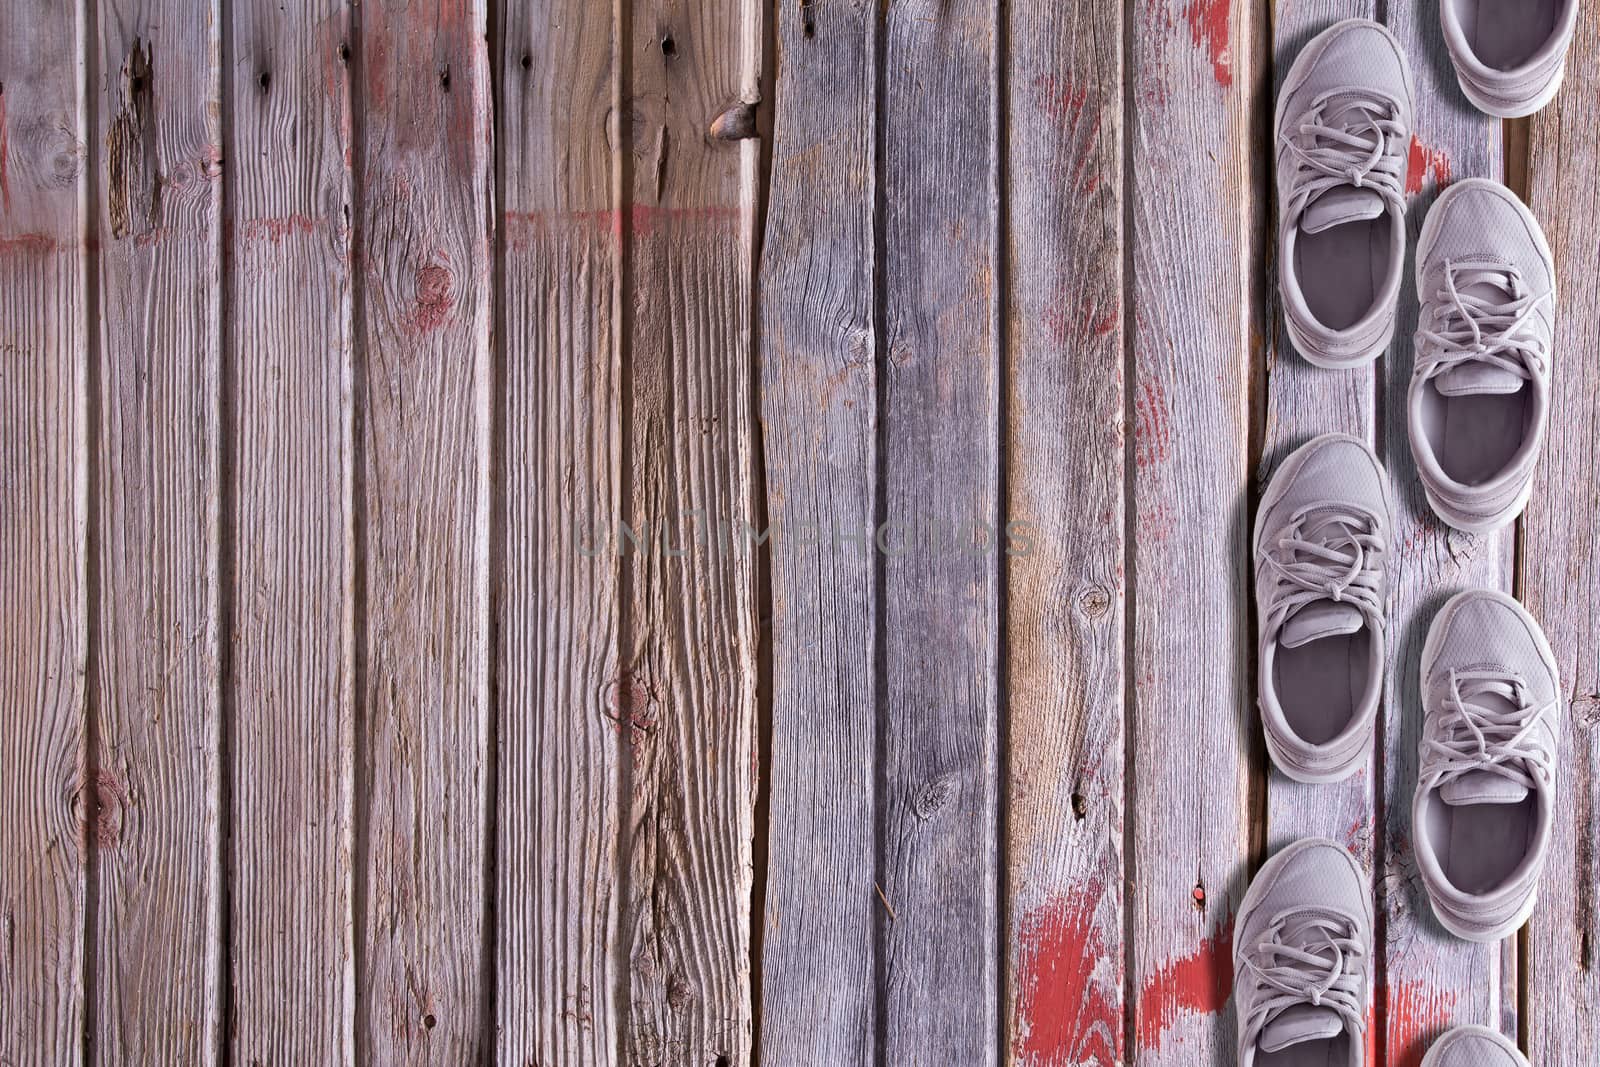 Shoe border with a double row of worn trainers or sneakers arranged as though walking on a textured hardwood background of old floorboards with wood grain, red paint remnants and copyspace